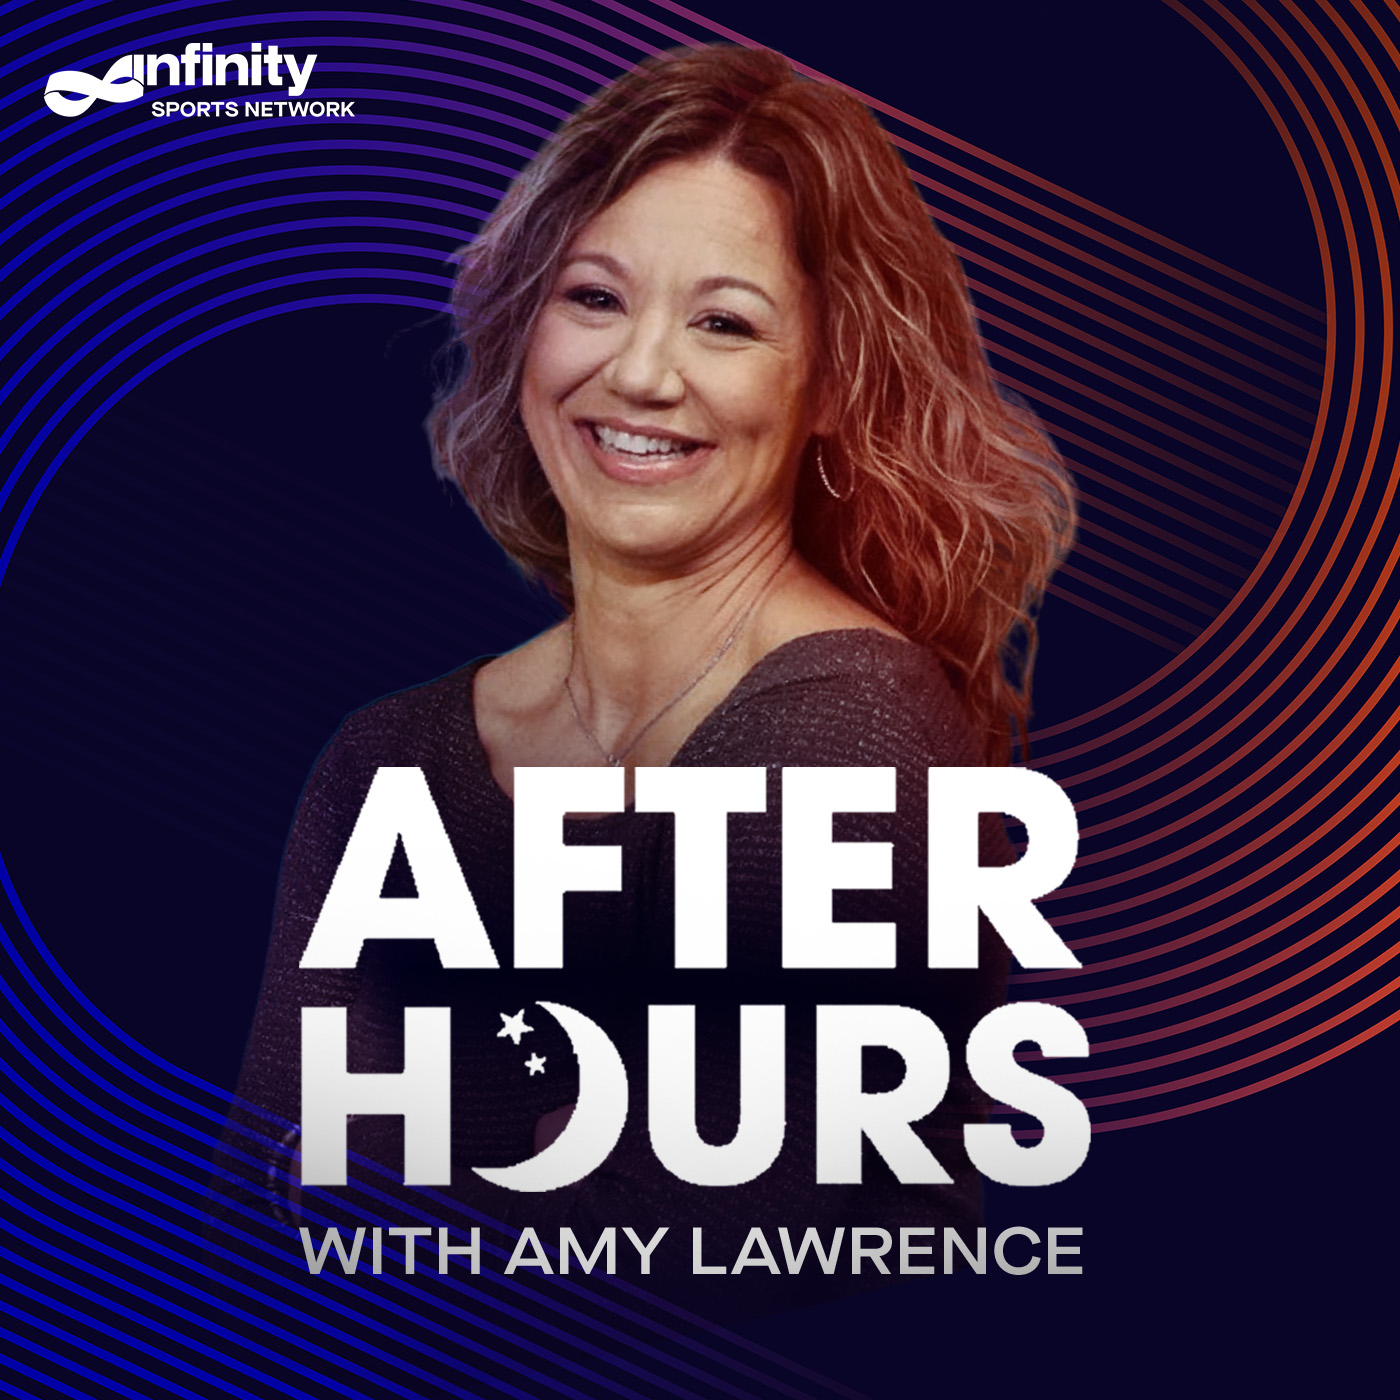 12-16-21 After Hours with Amy Lawrence PODCAST: Hour 2